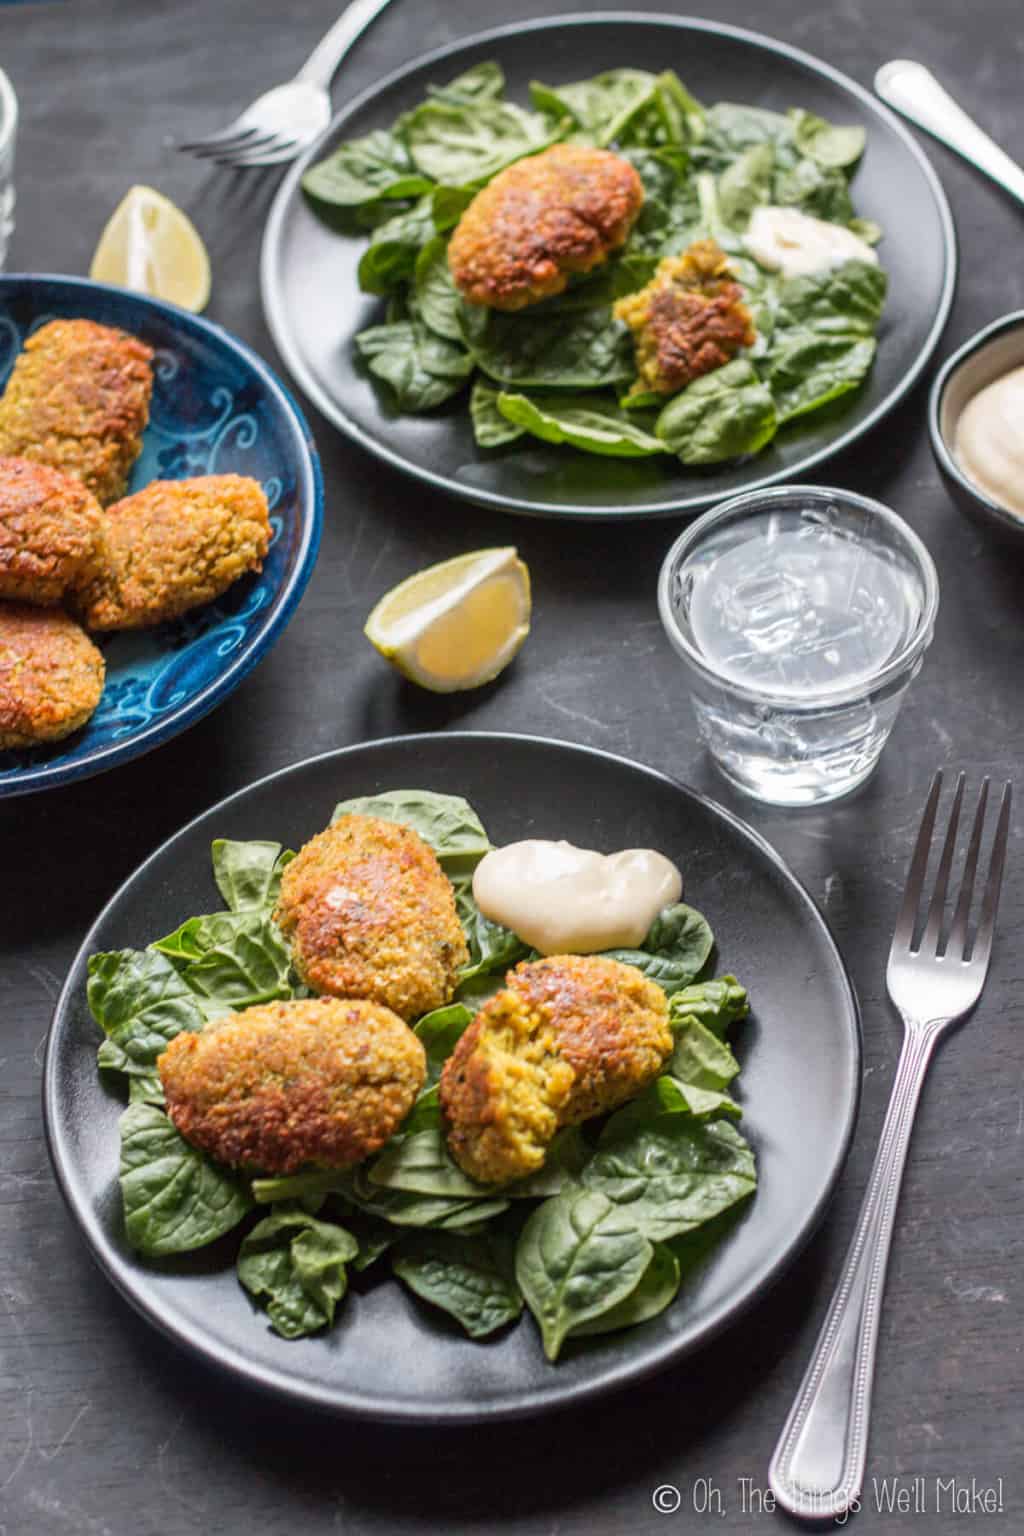 Several plates full of pieces of turmeric falafels placed on top of leafy greens with a dollop of sauce on the side.